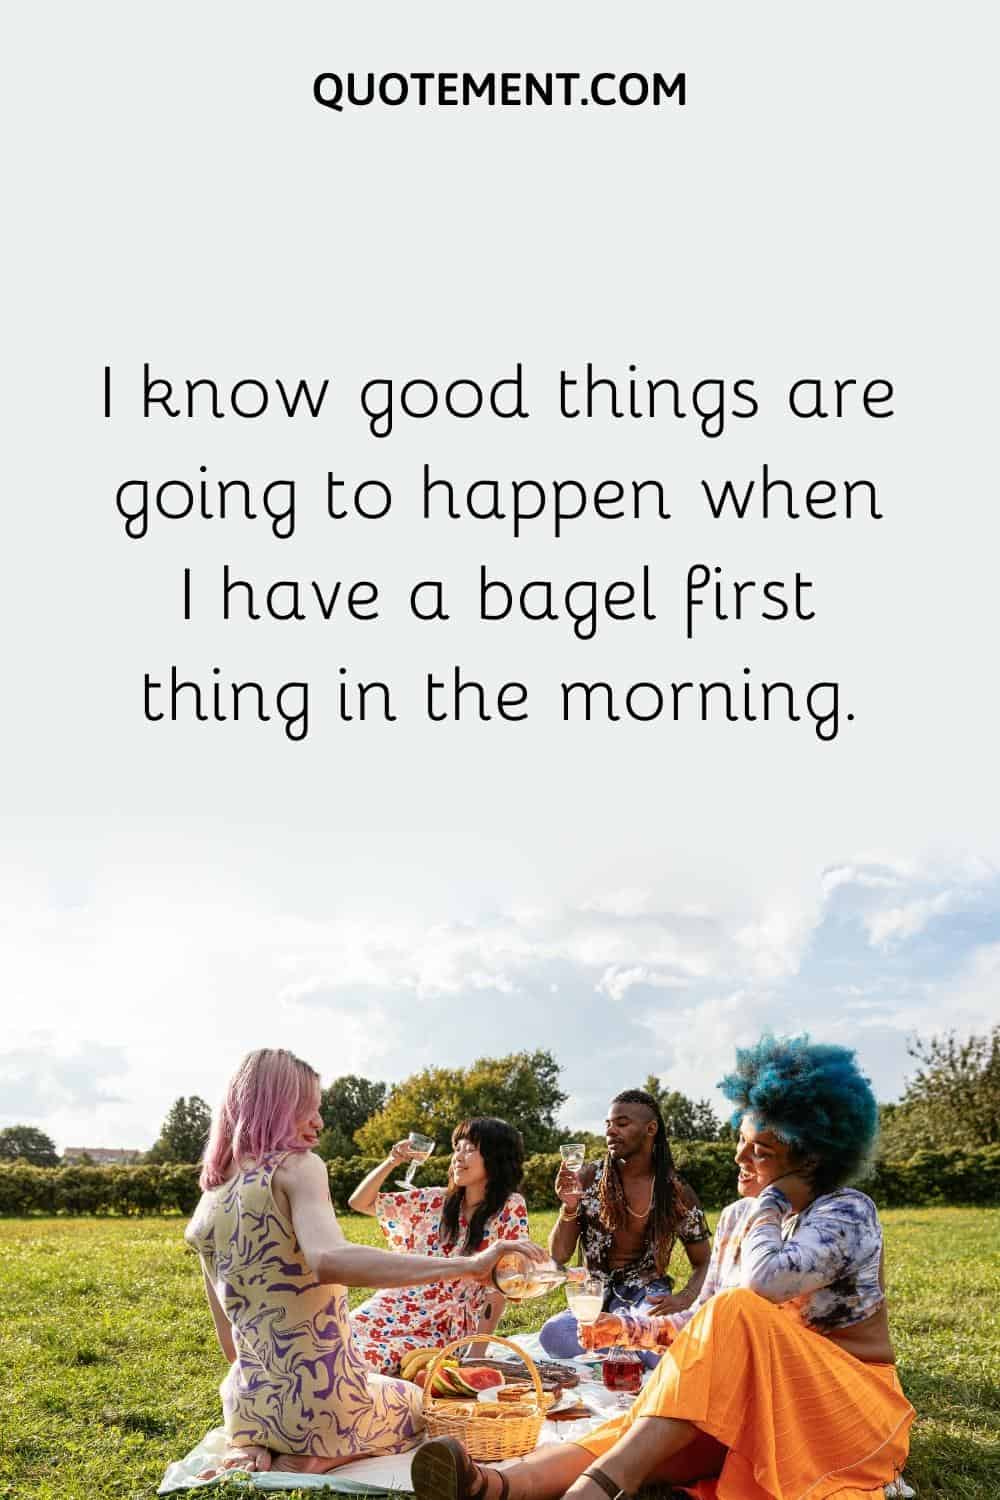 I know good things are going to happen when I have a bagel first thing in the morning.